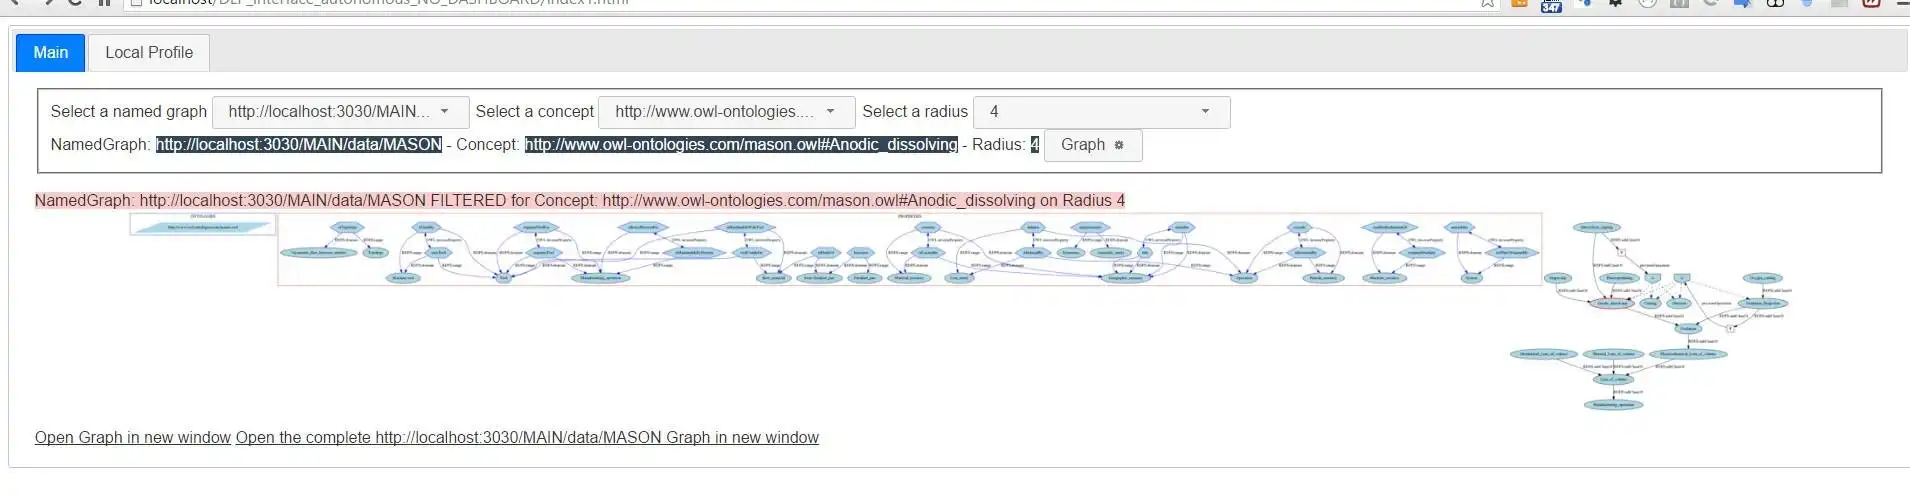 Download web tool or web app SW-DLP: Developing ontoLogy by Profiling